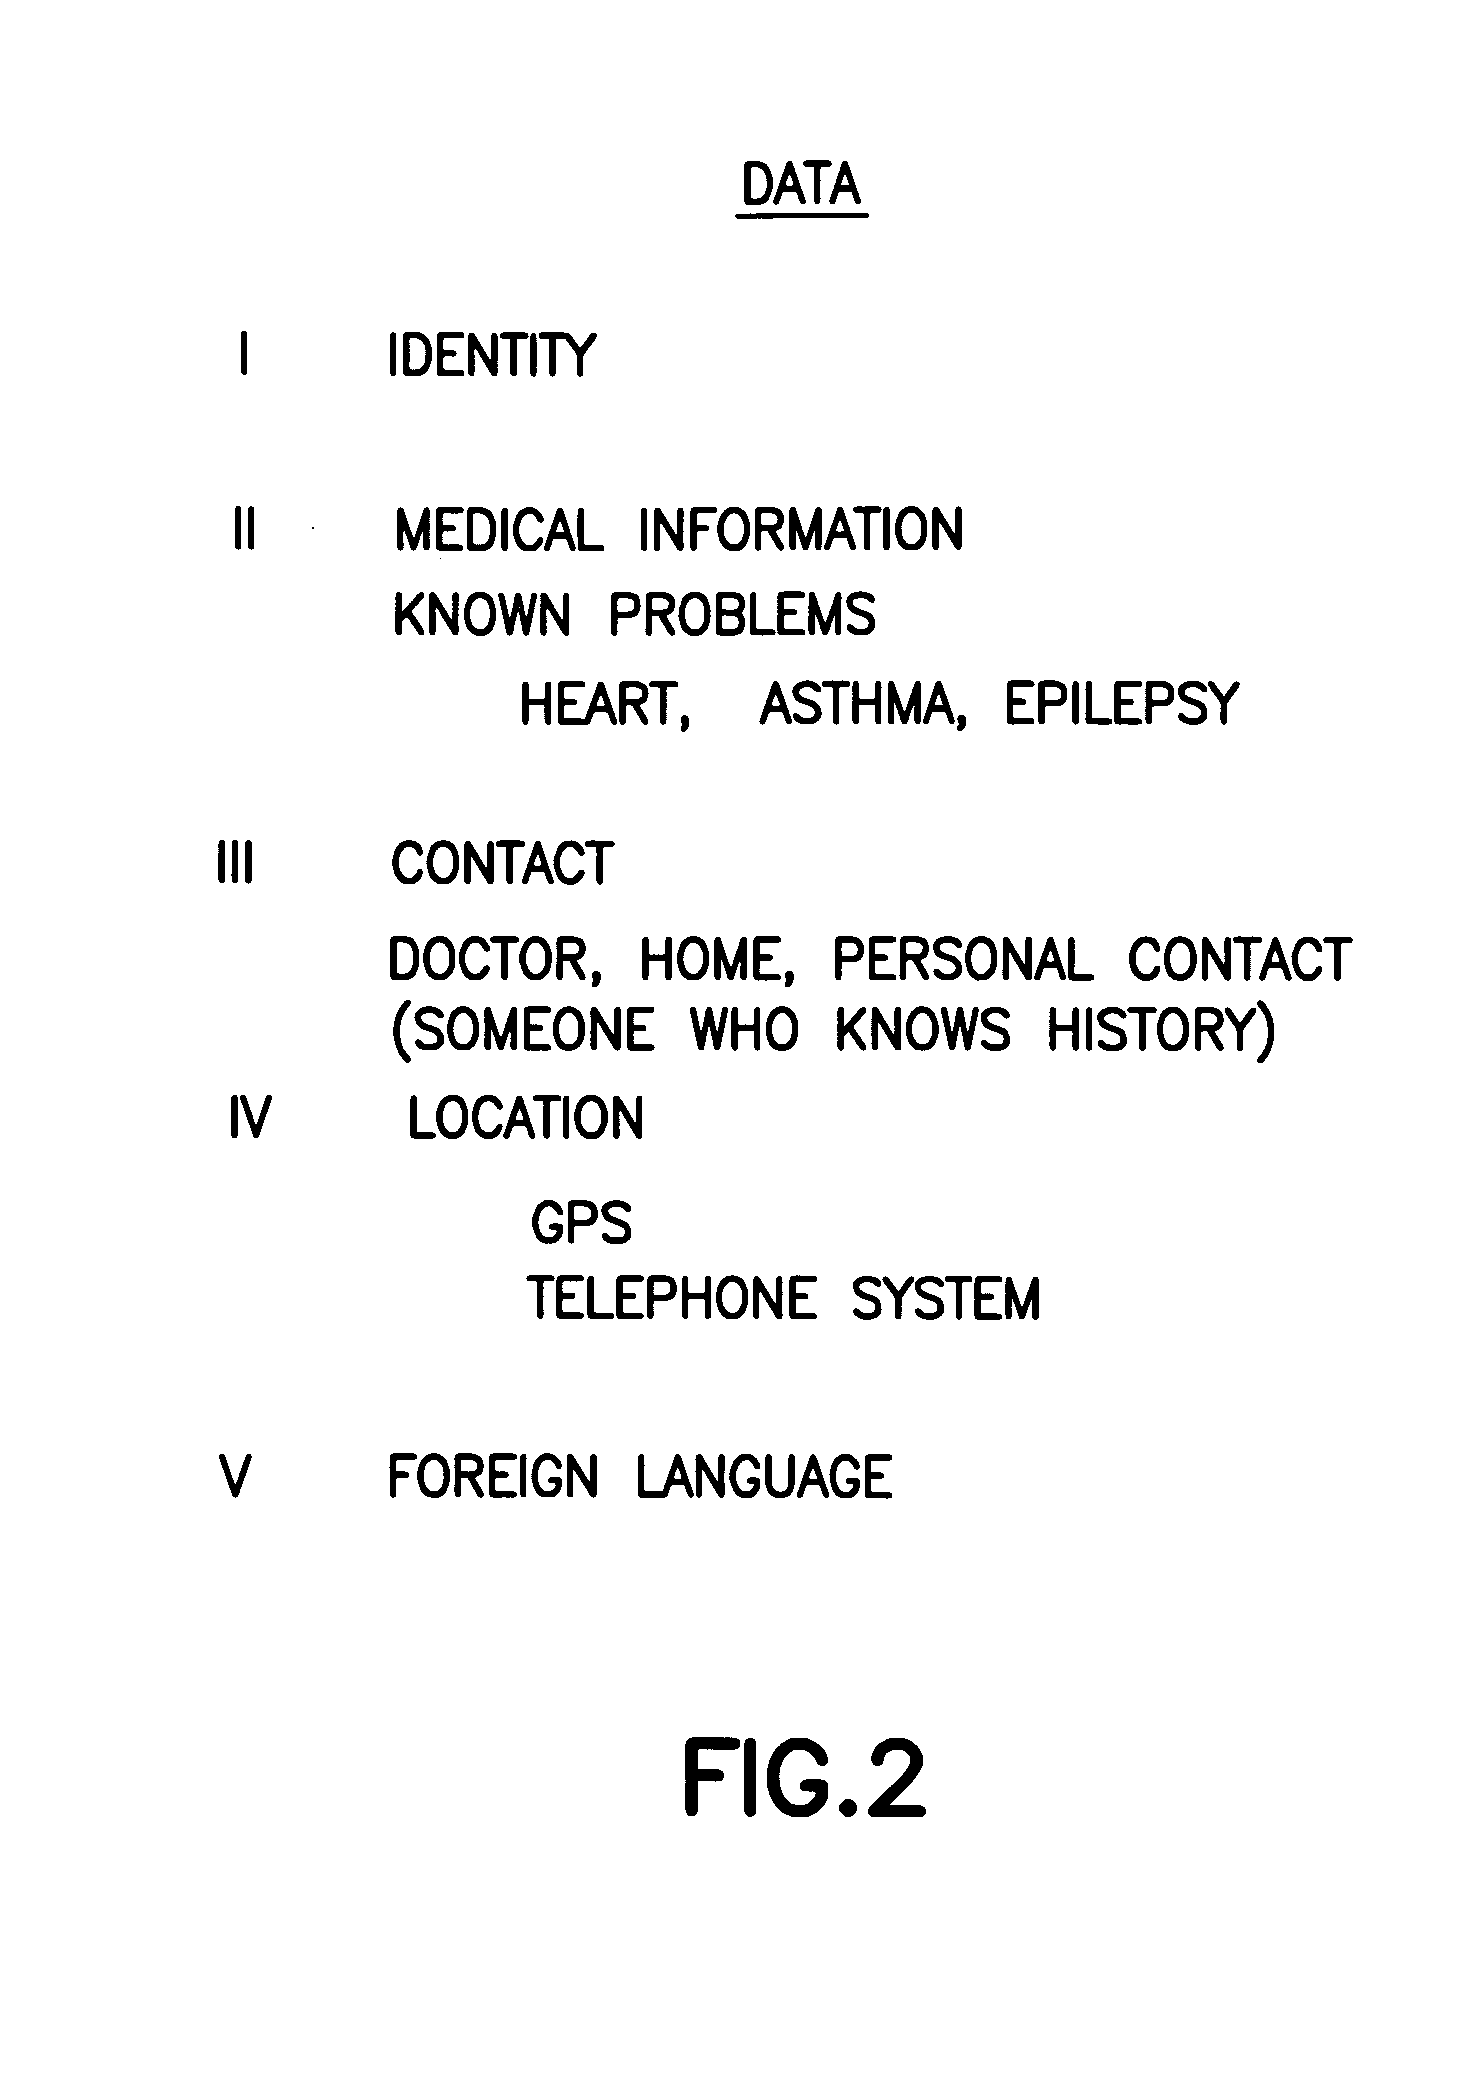 Emergency response system with personal emergency device